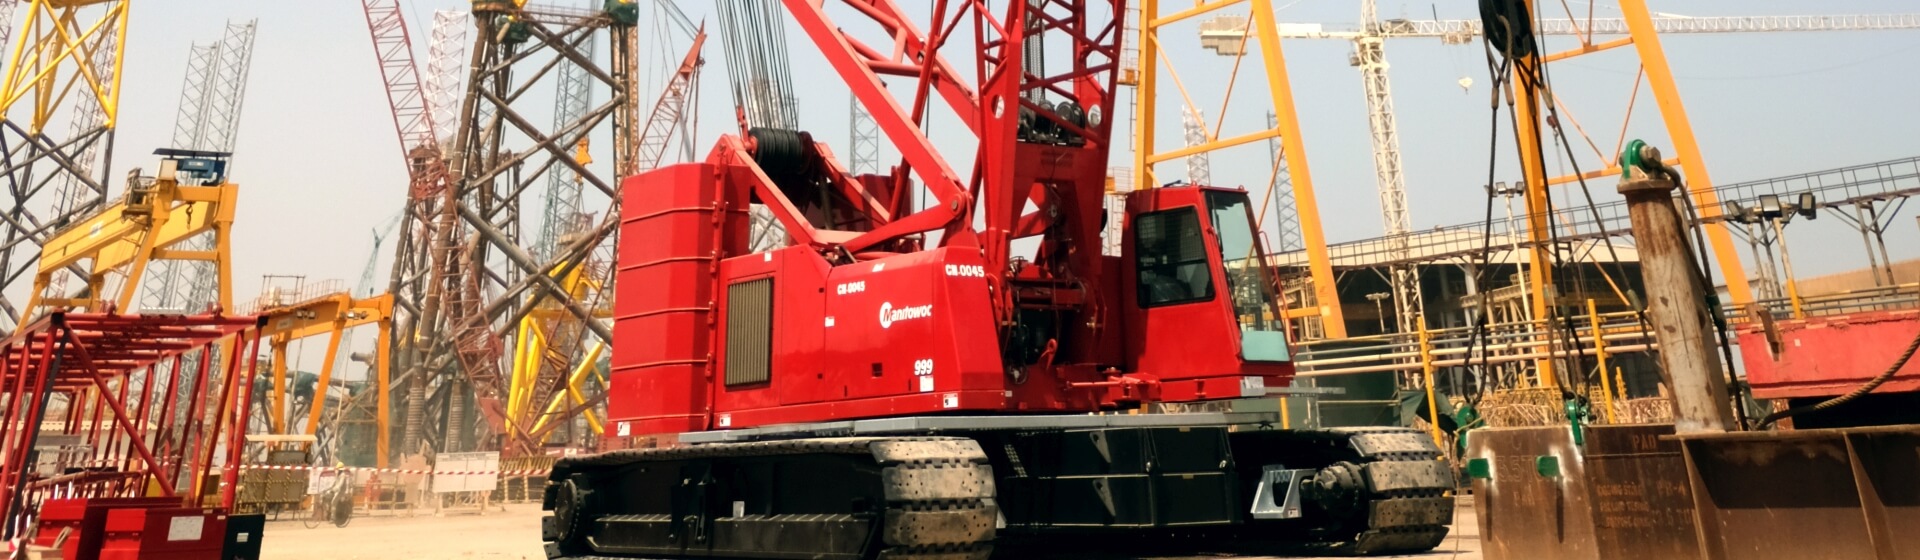 Lamprell-adds-second-Manitowoc-999-crawler-crane-to-support-energy-projects-1.jpg